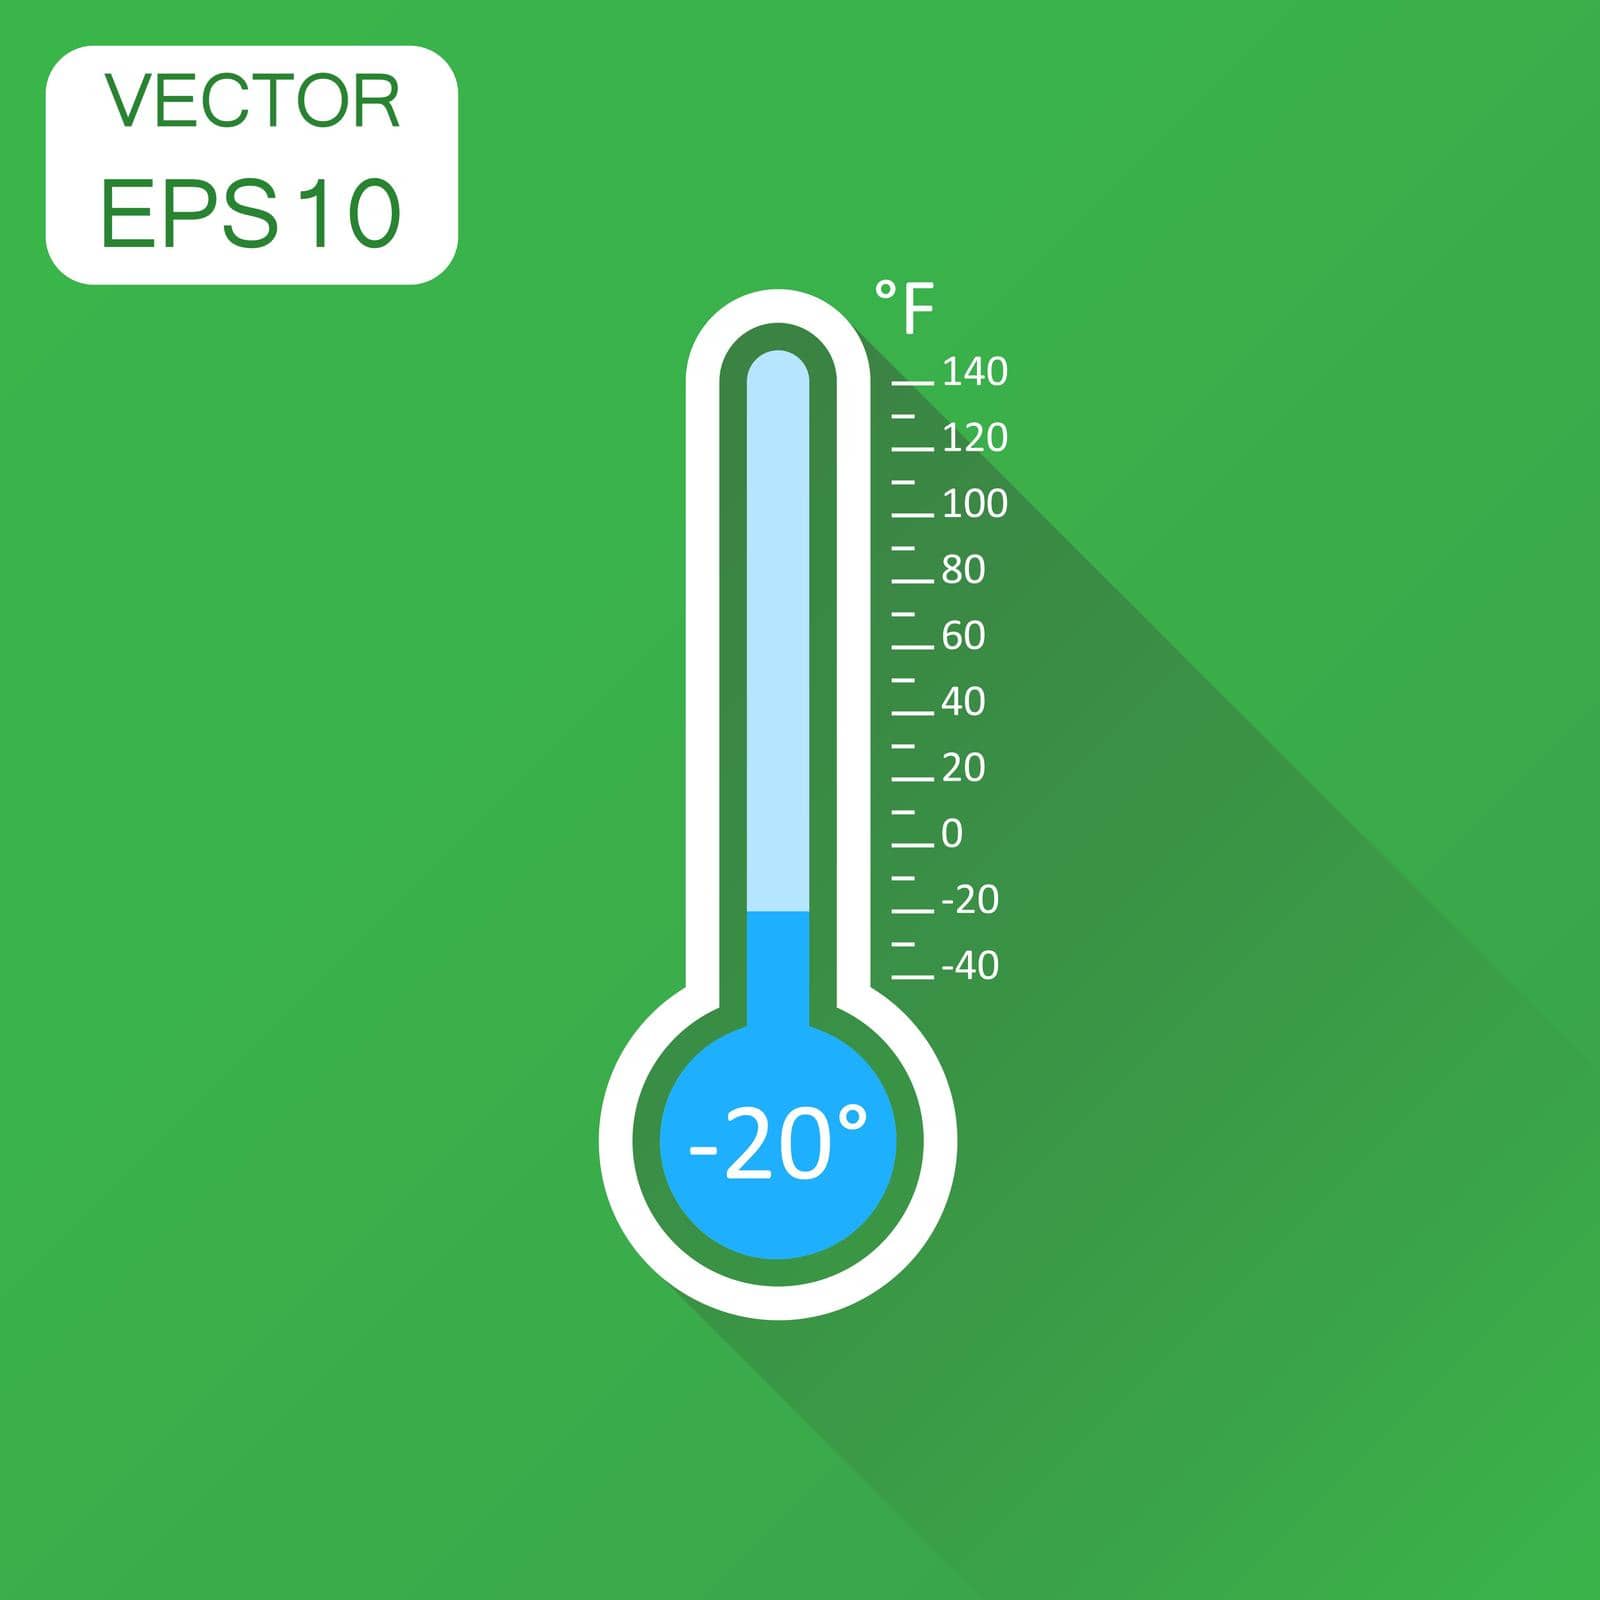 Thermometer icon. Business concept goal pictogram. Vector illustration on green background with long shadow. by LysenkoA